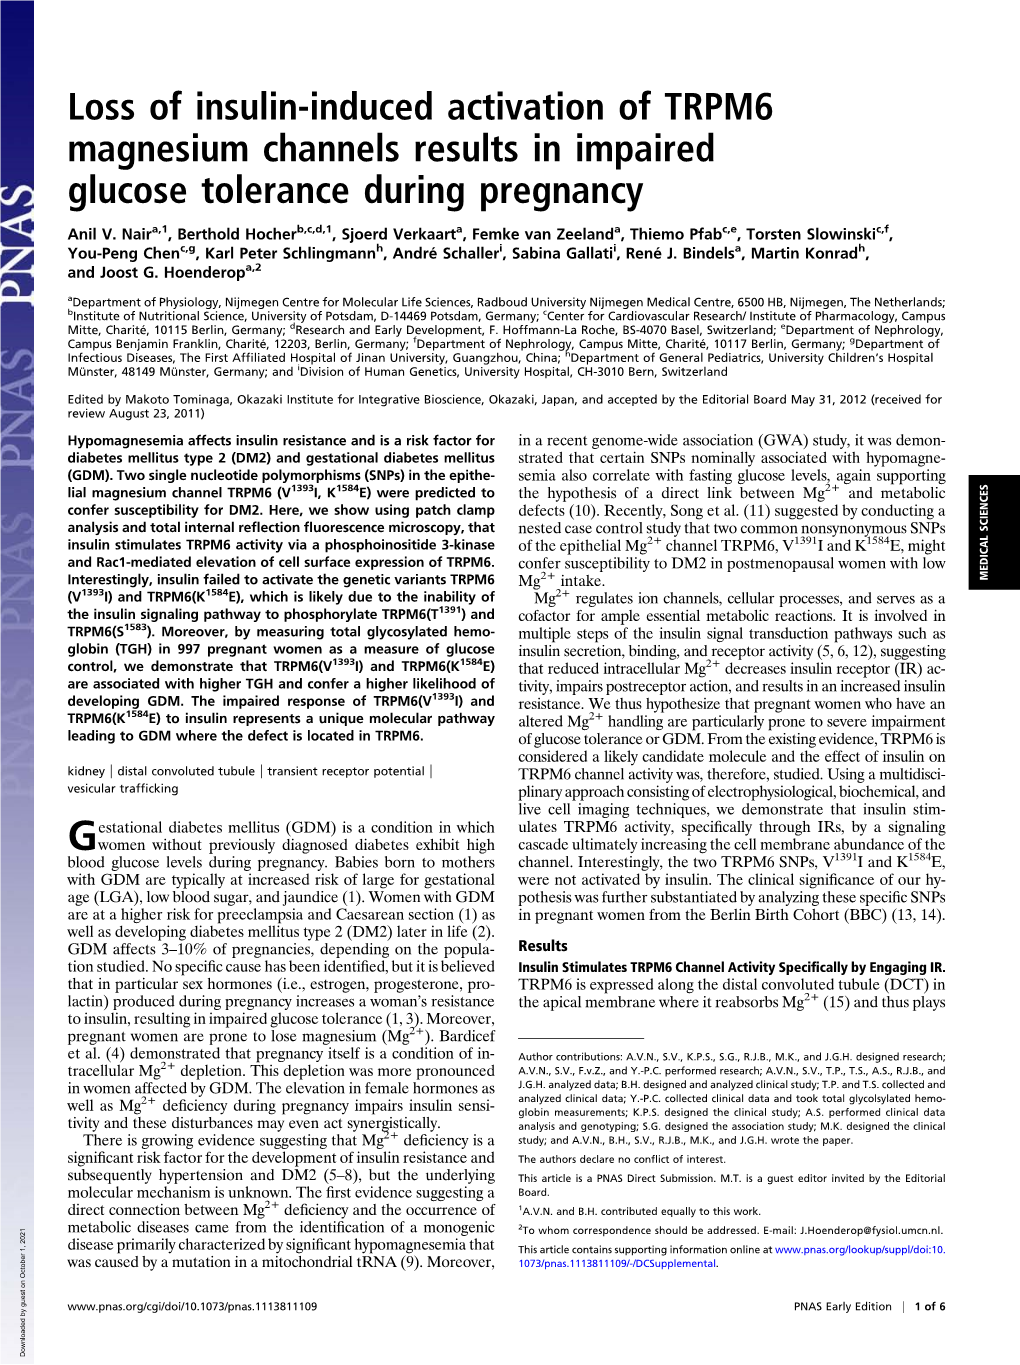 Loss of Insulin-Induced Activation of TRPM6 Magnesium Channels Results in Impaired Glucose Tolerance During Pregnancy